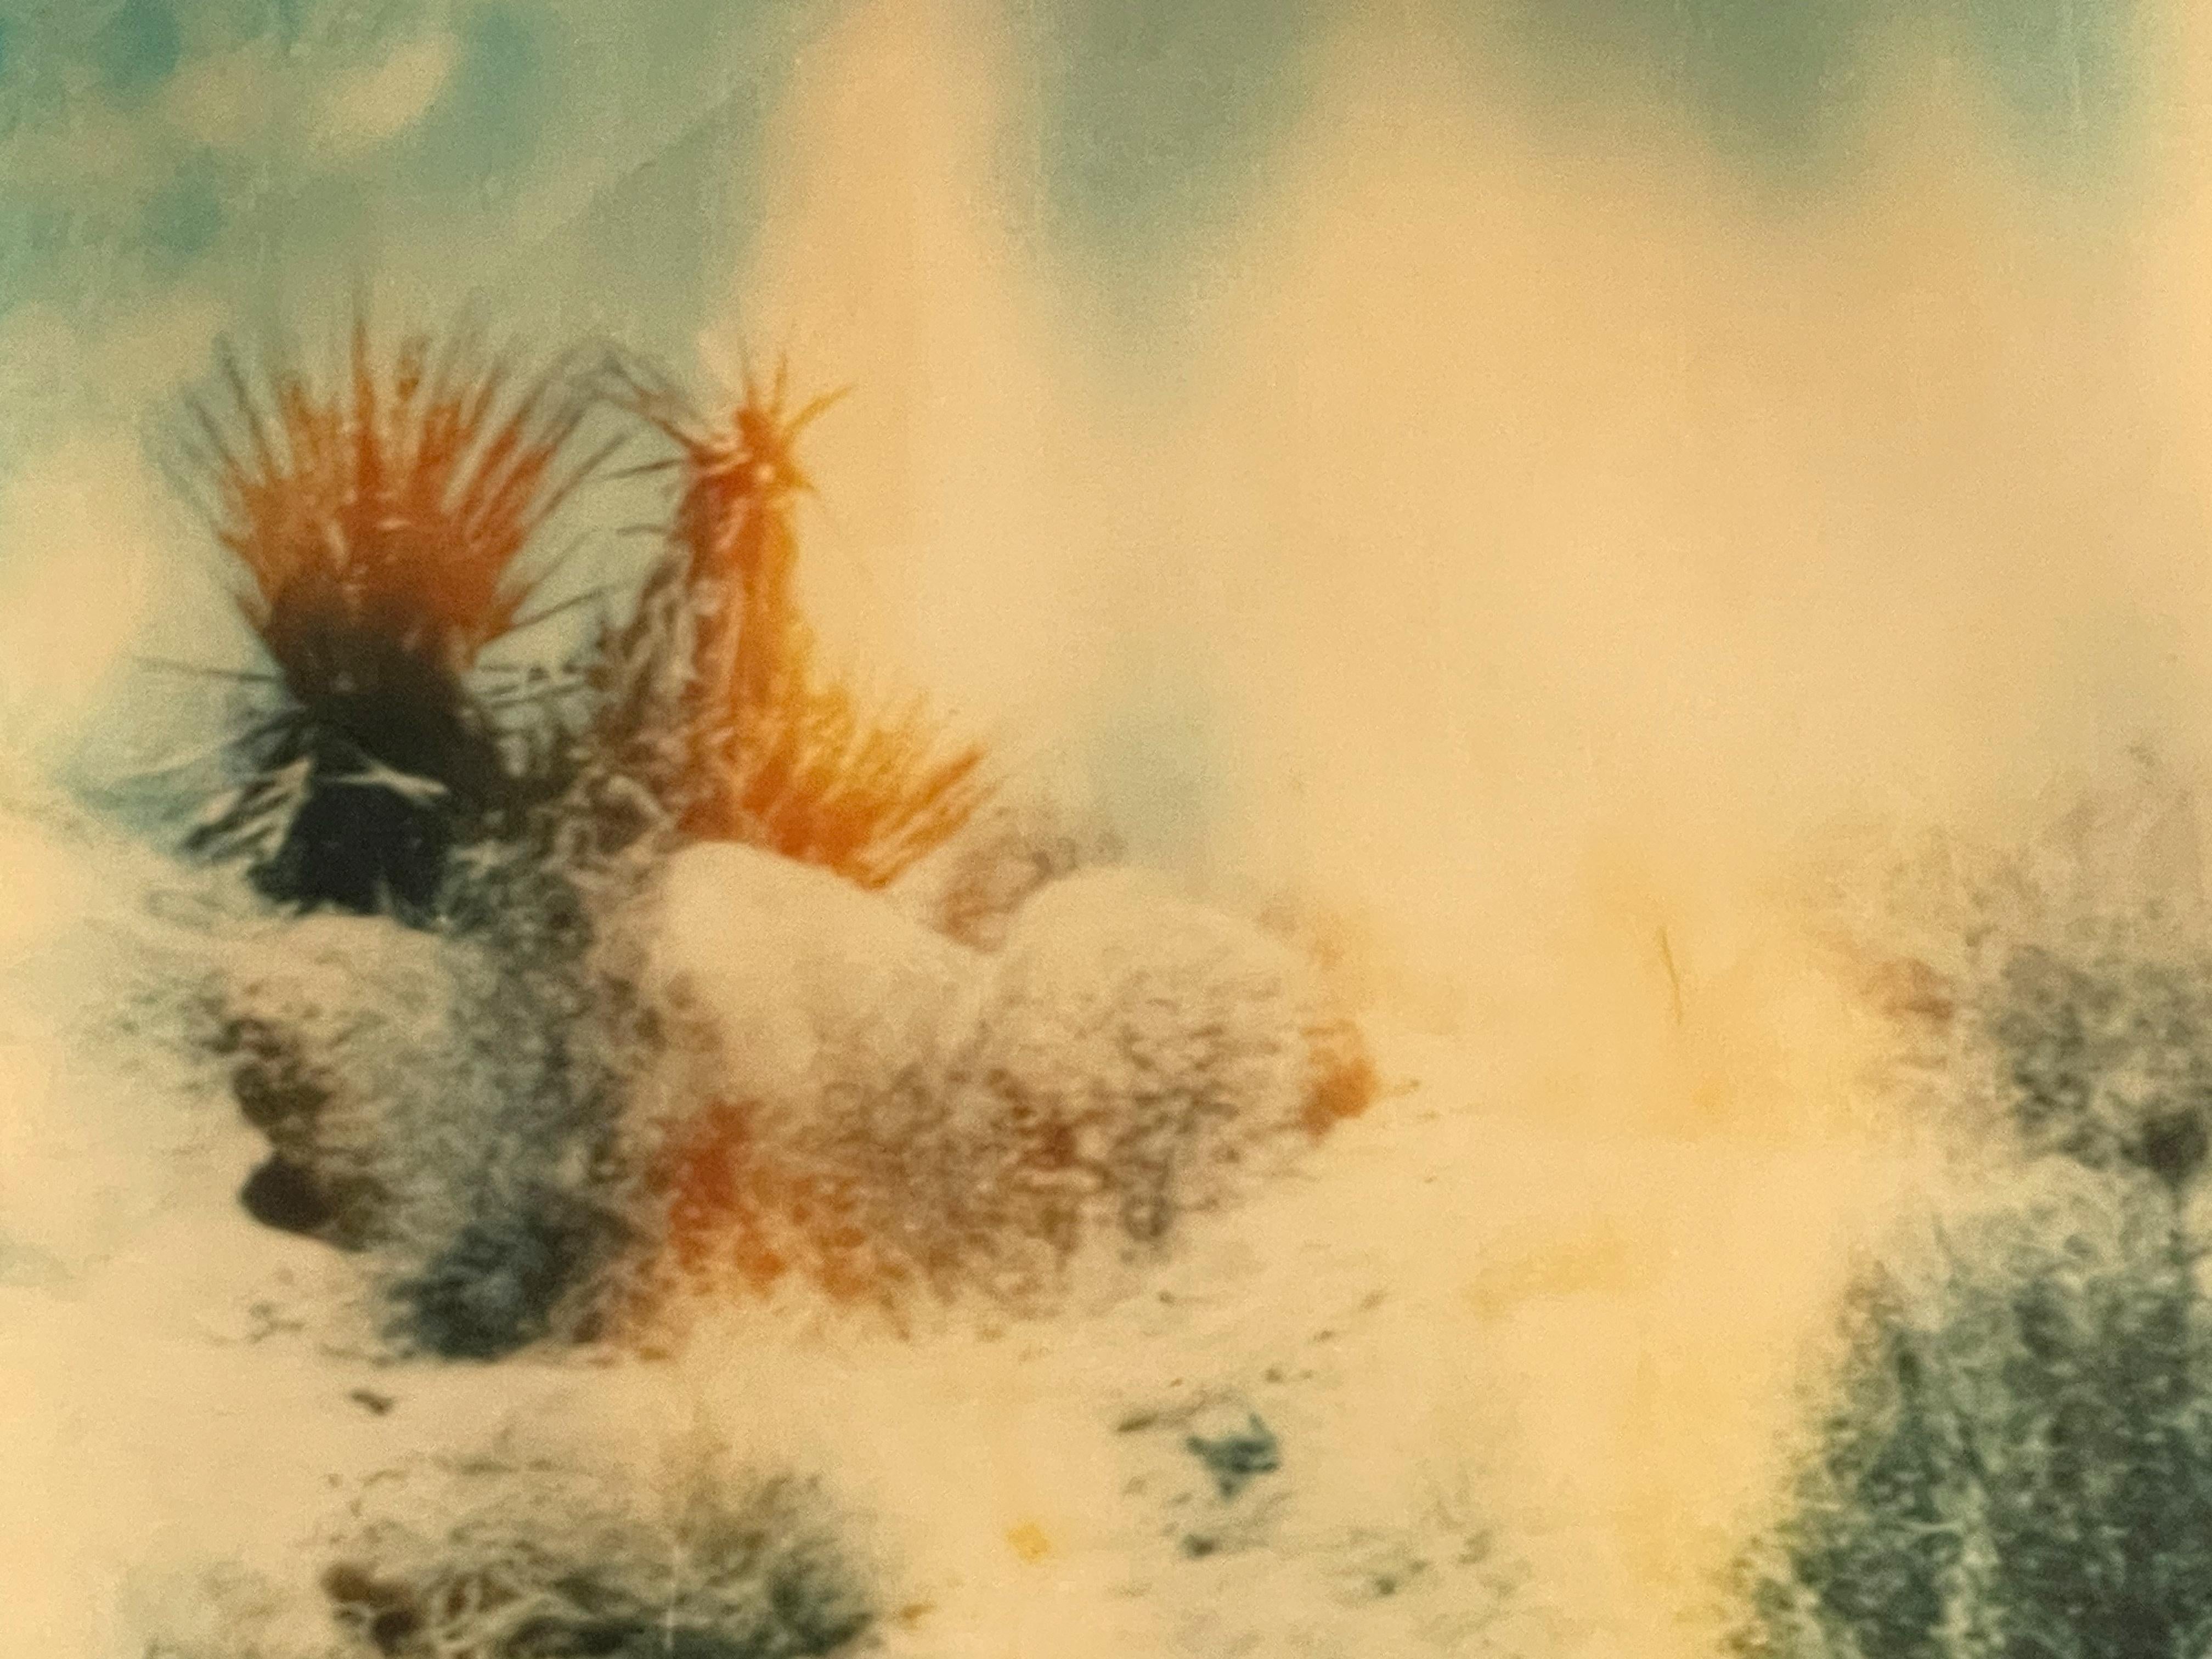 Buried - Contemporary, Landscape, Figurative, expired, Polaroid, analog For Sale 4